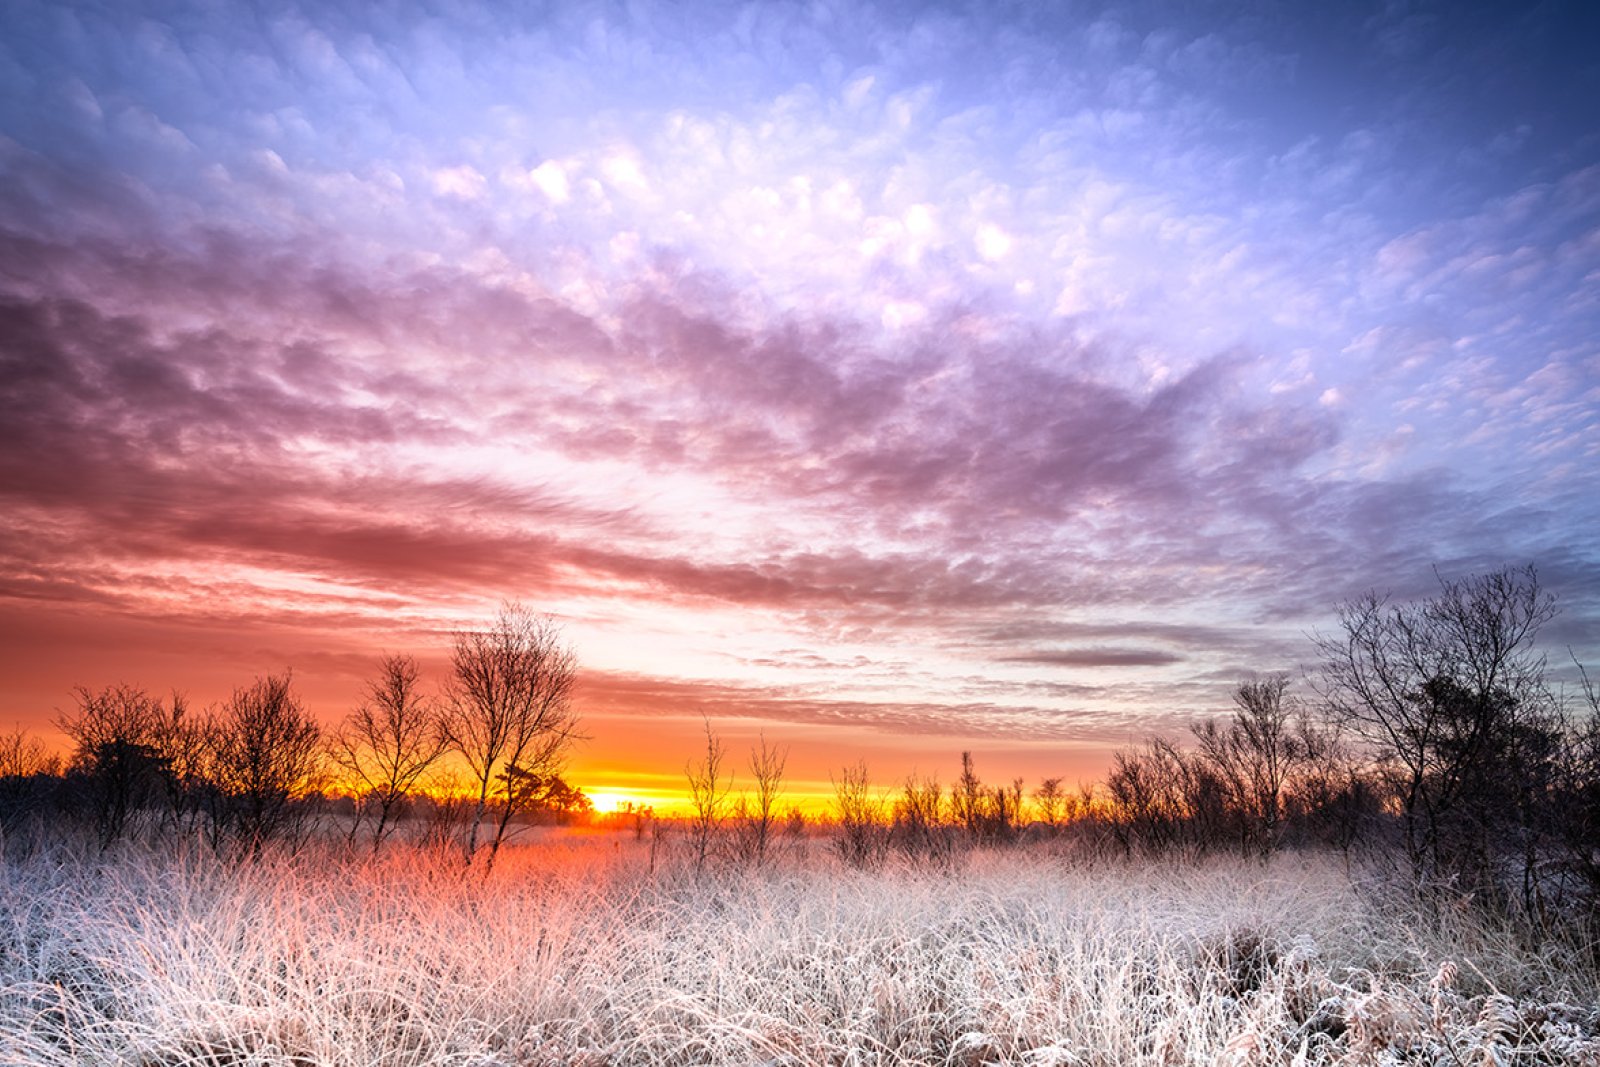 Sunrise in winter at National park Groote Peel between the provinces of Limburg and North Brabant